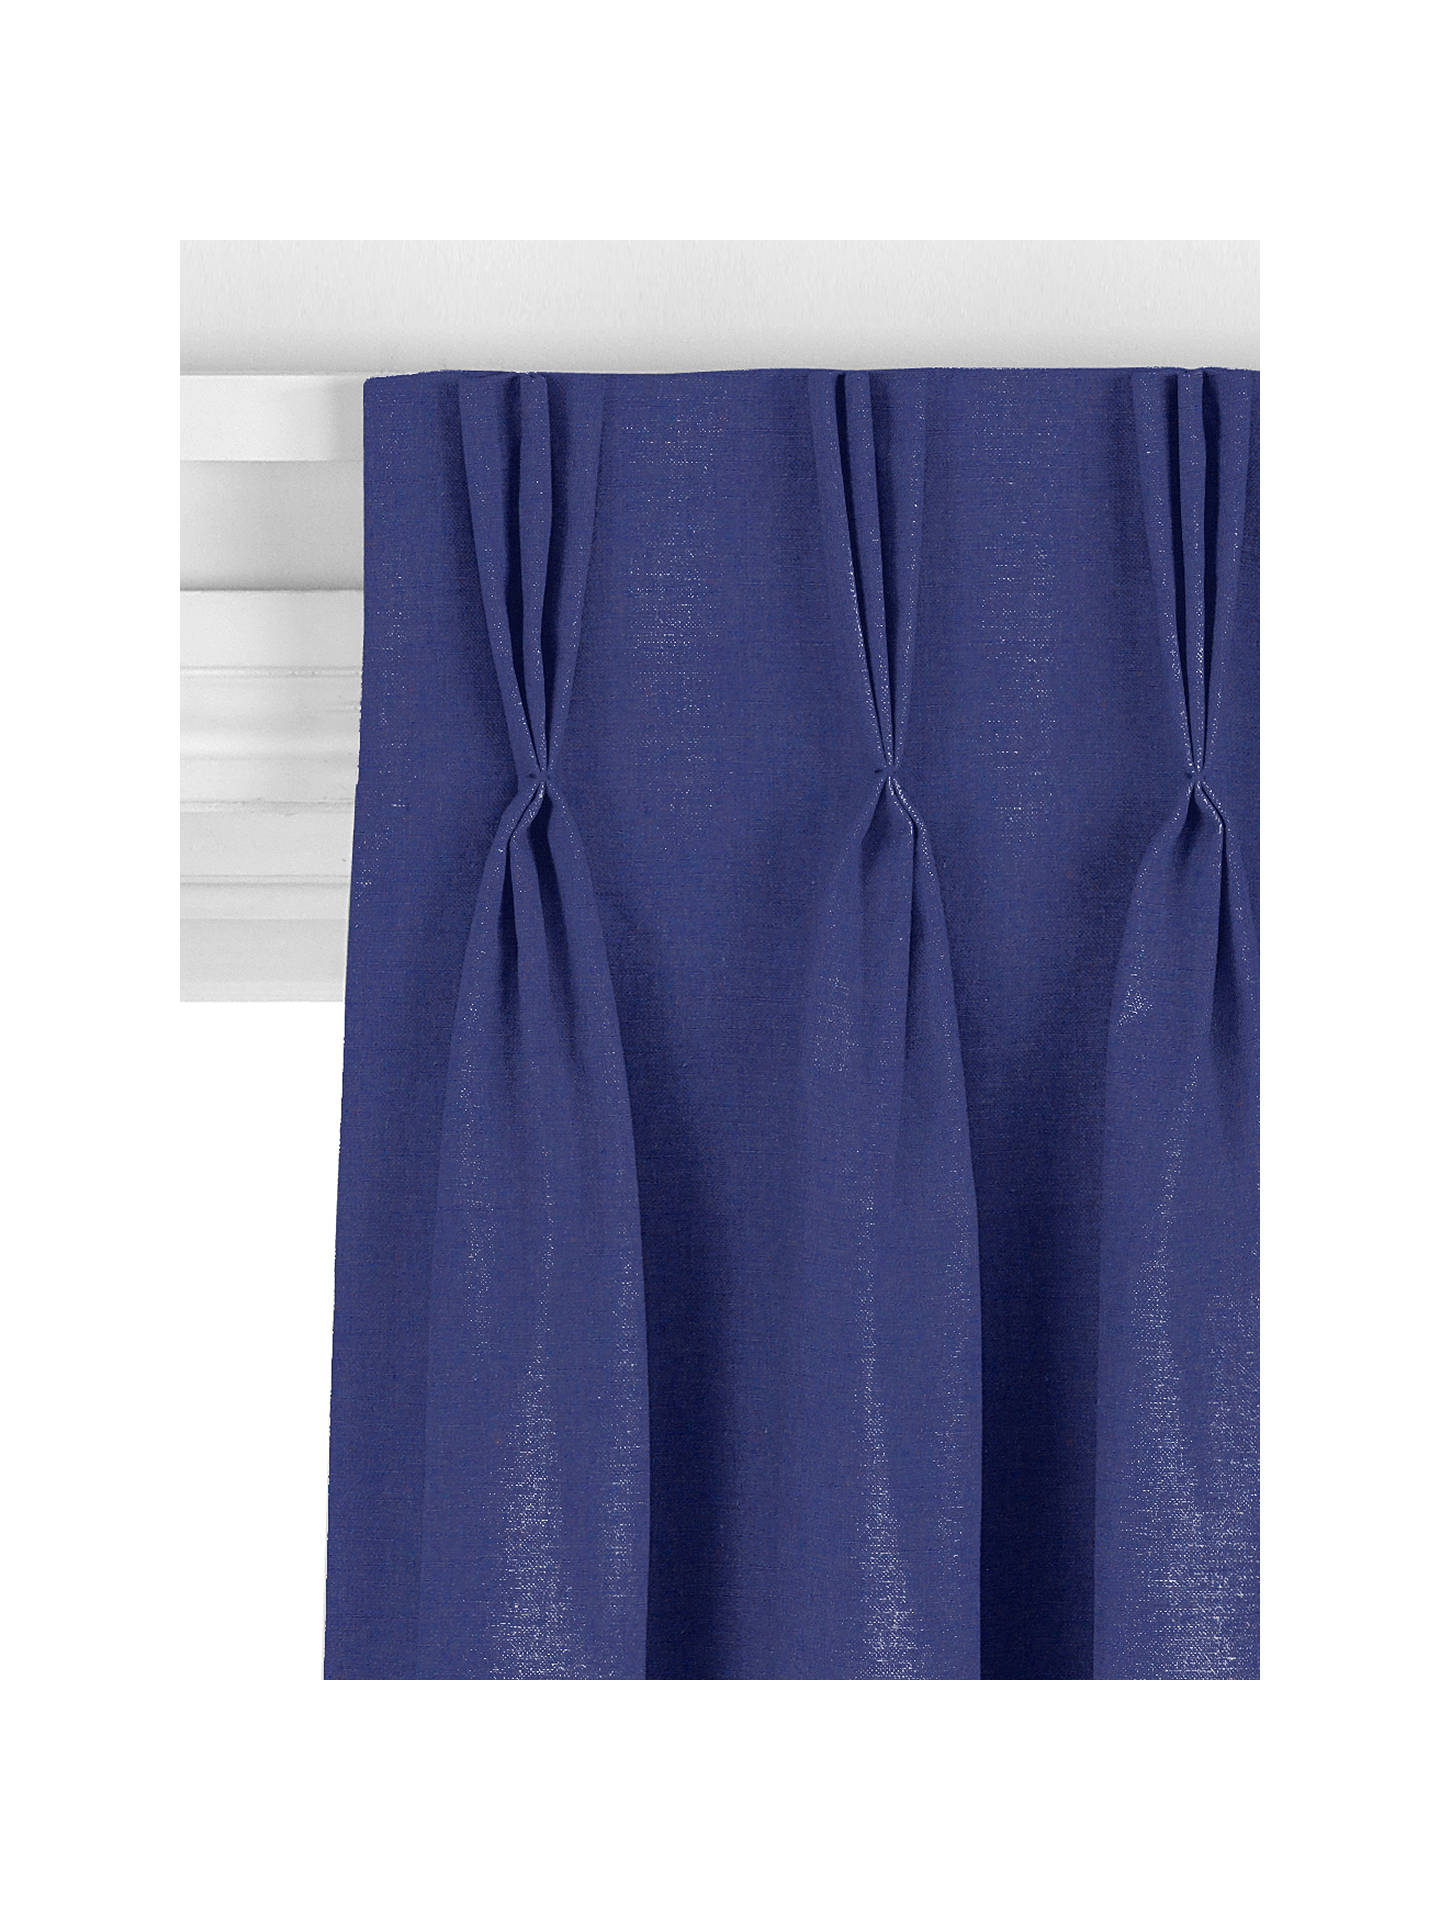 John Lewis & Partners Linen Look Made to Measure Curtains, Navy